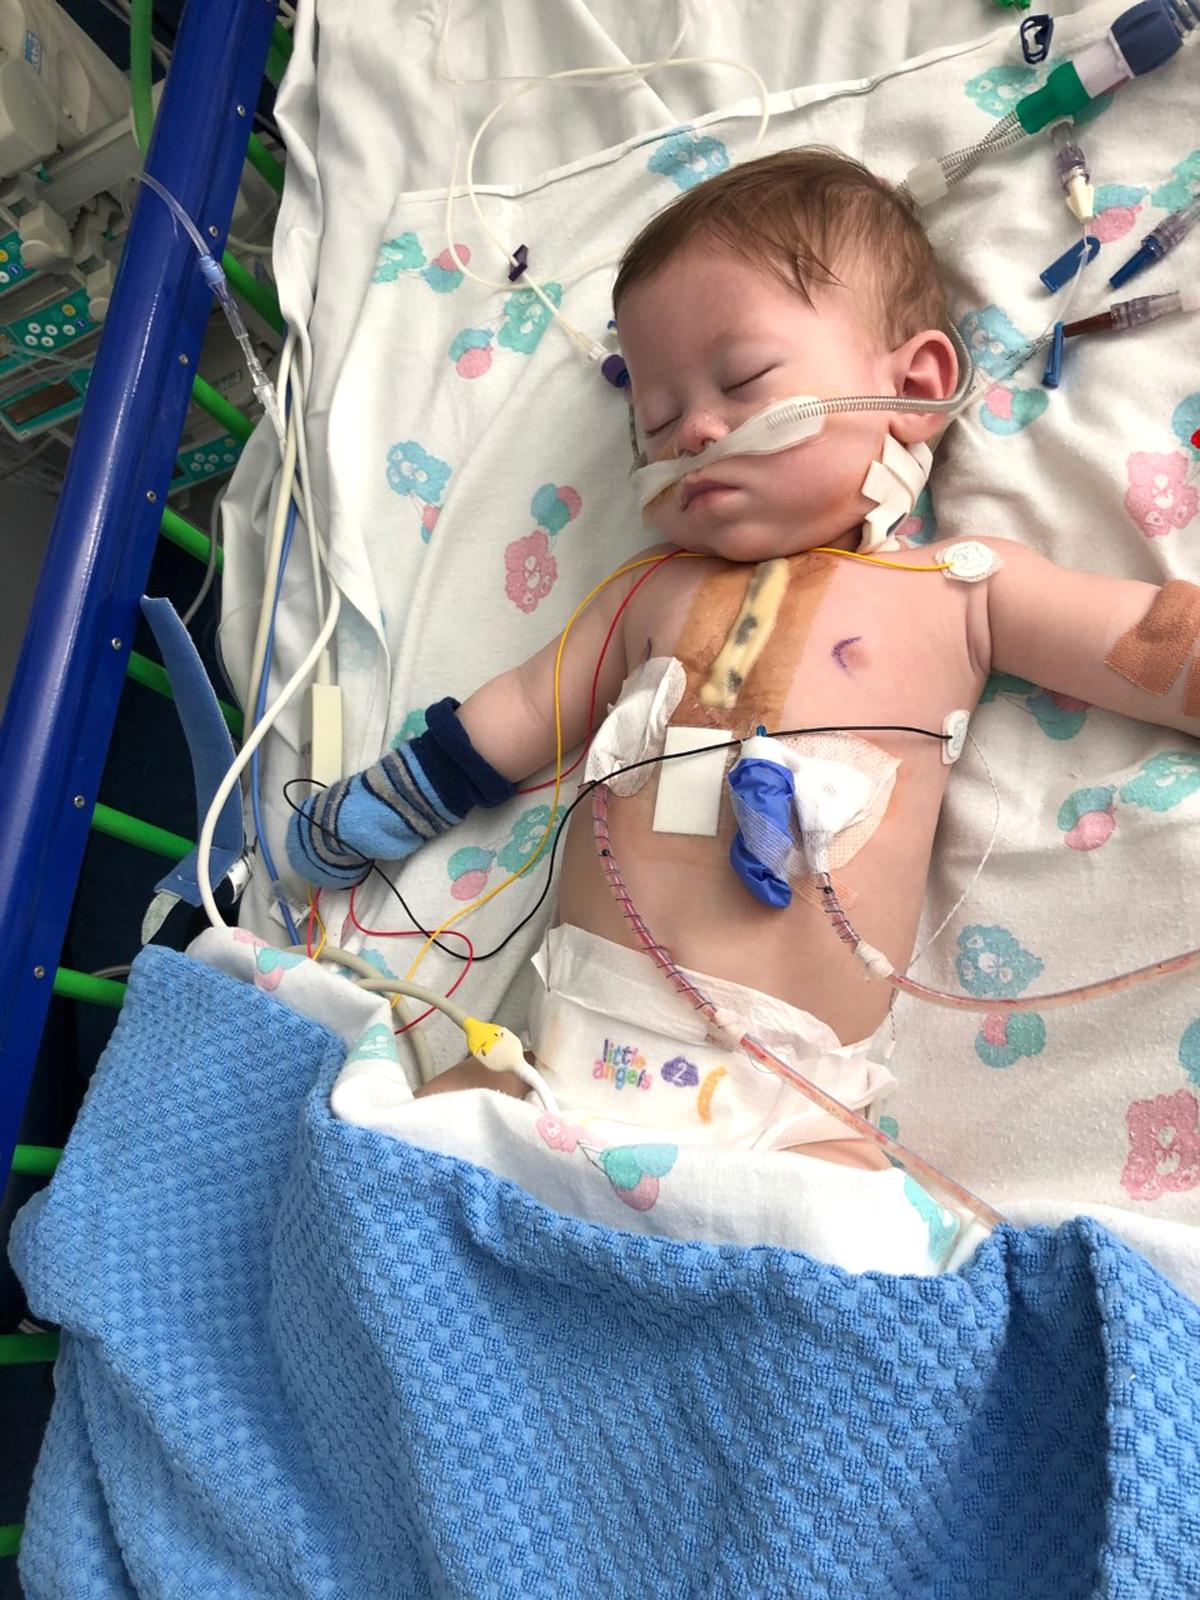 Riley has undergone two open-heart surgeries since his birth. (Caters News)